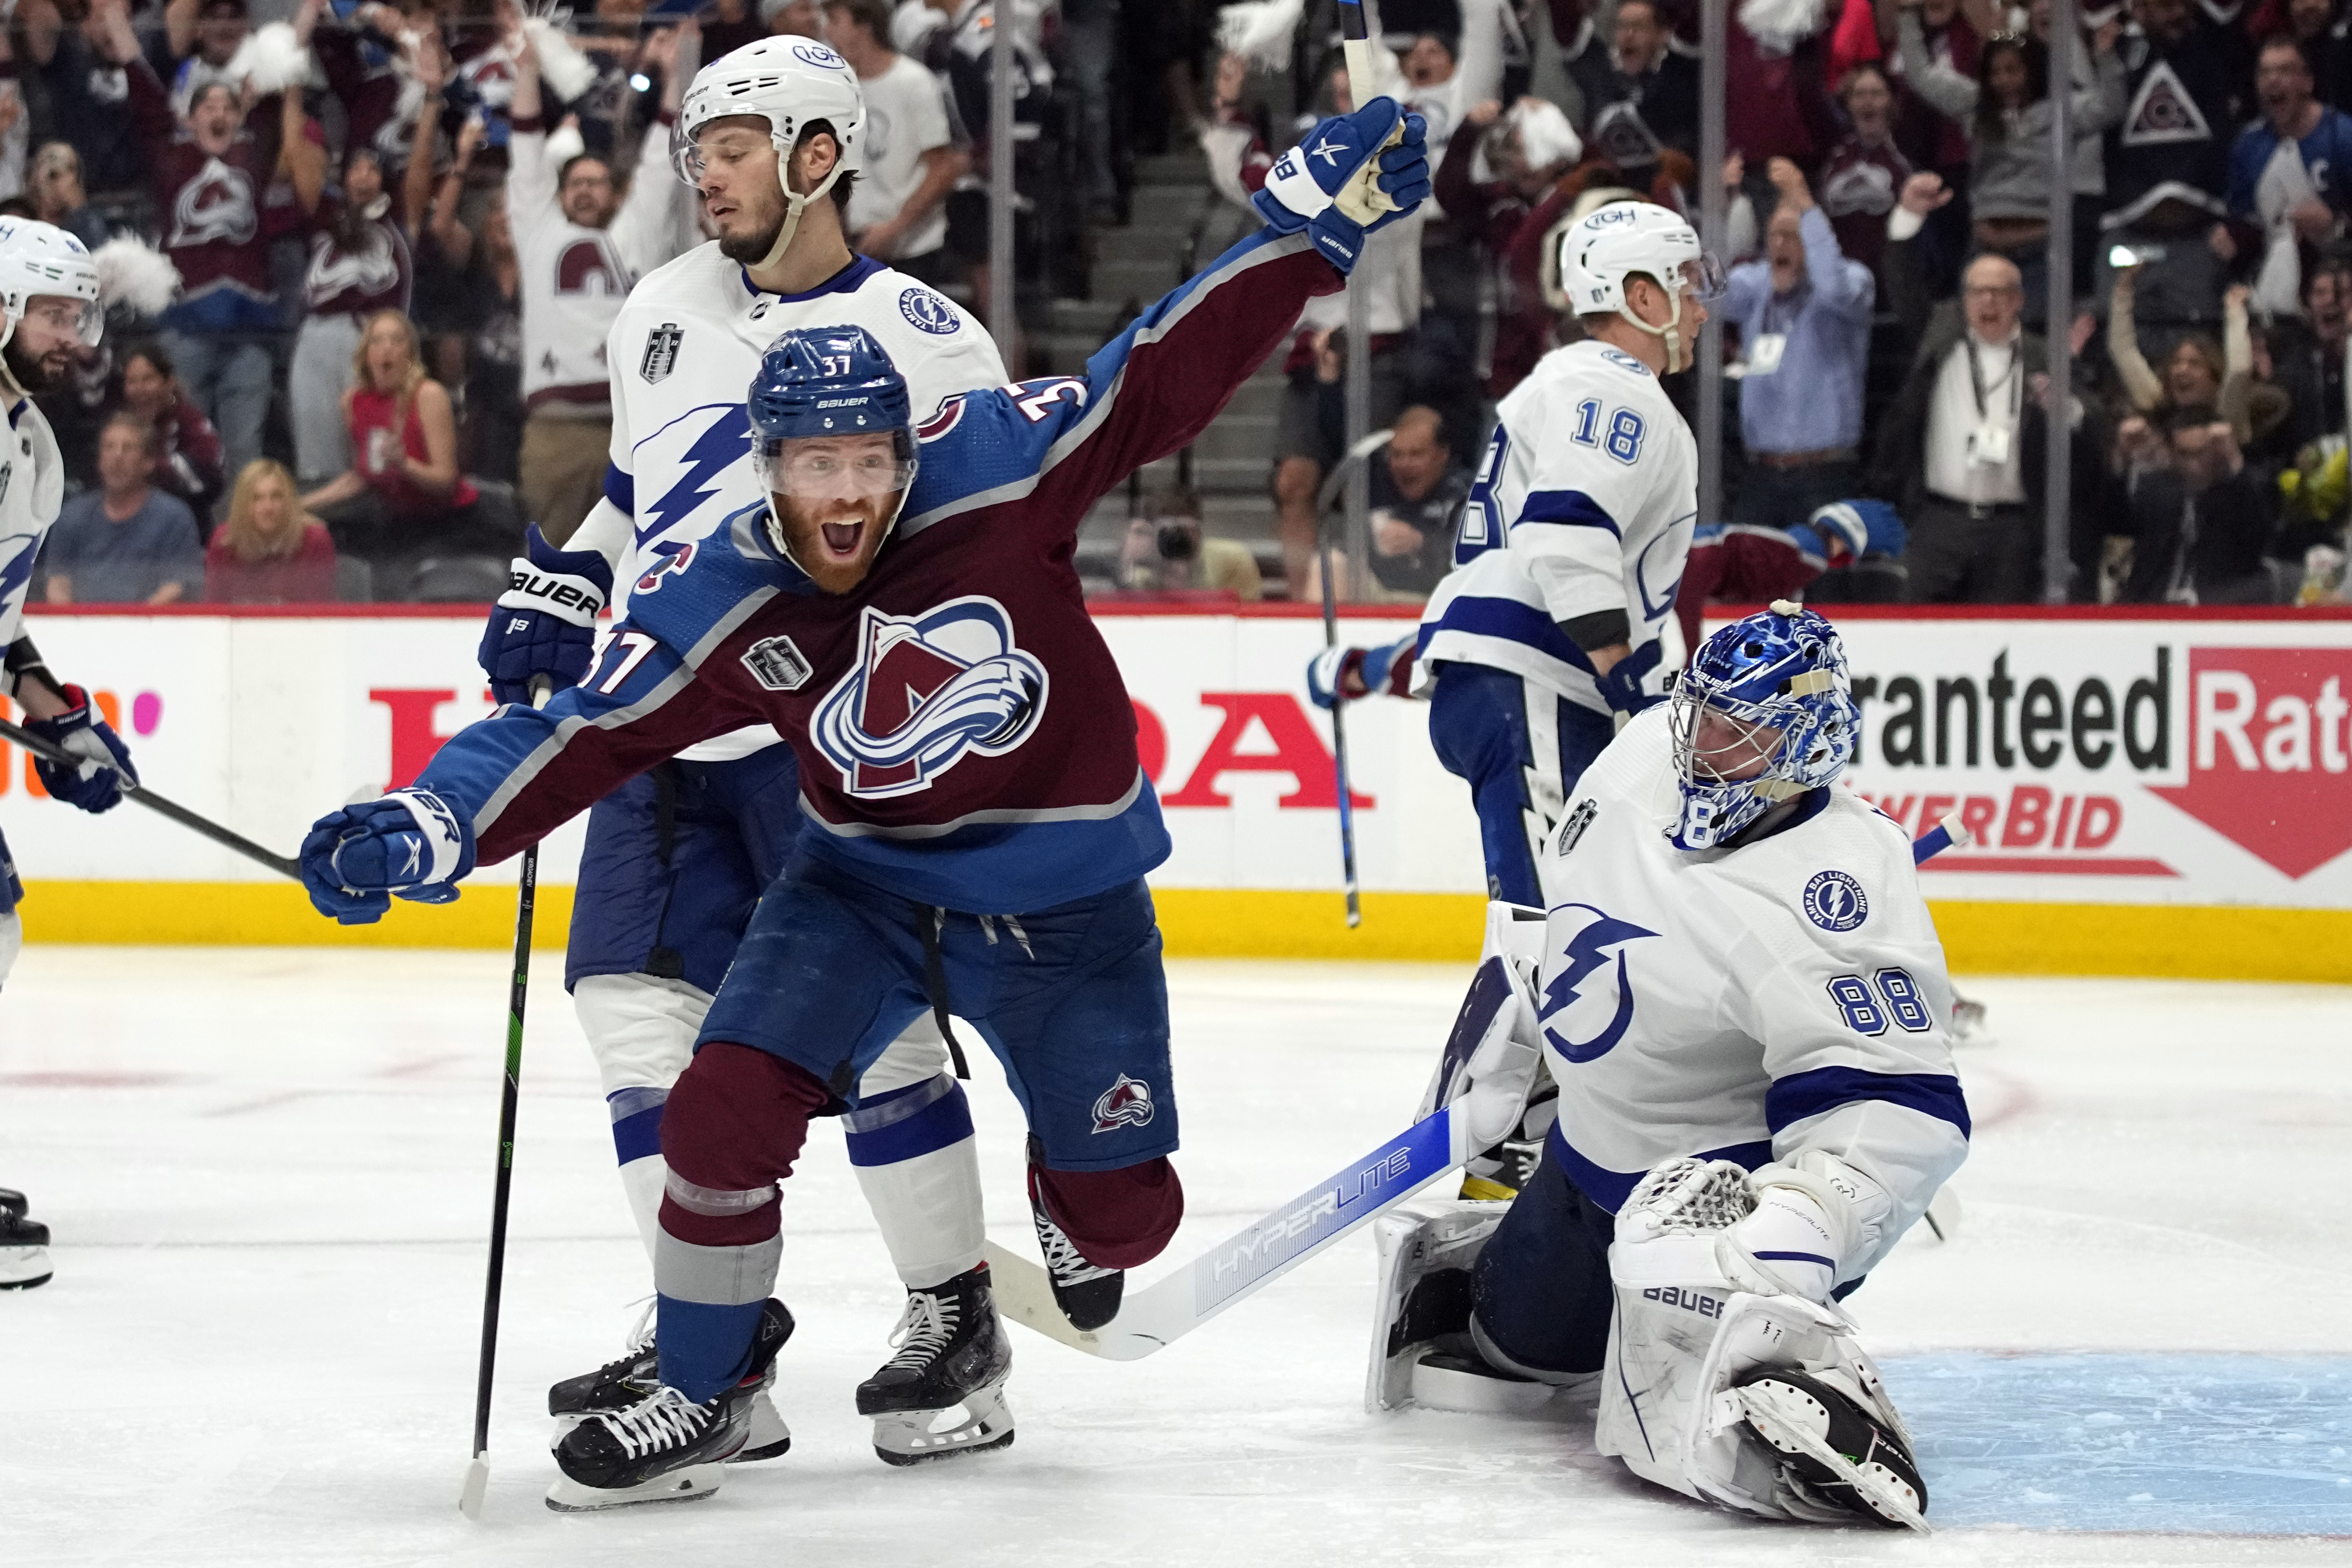 How to watch Game 2 of the Stanley Cup Finals Stream Colorado Avalanche vs Tampa Bay Lightning online for free